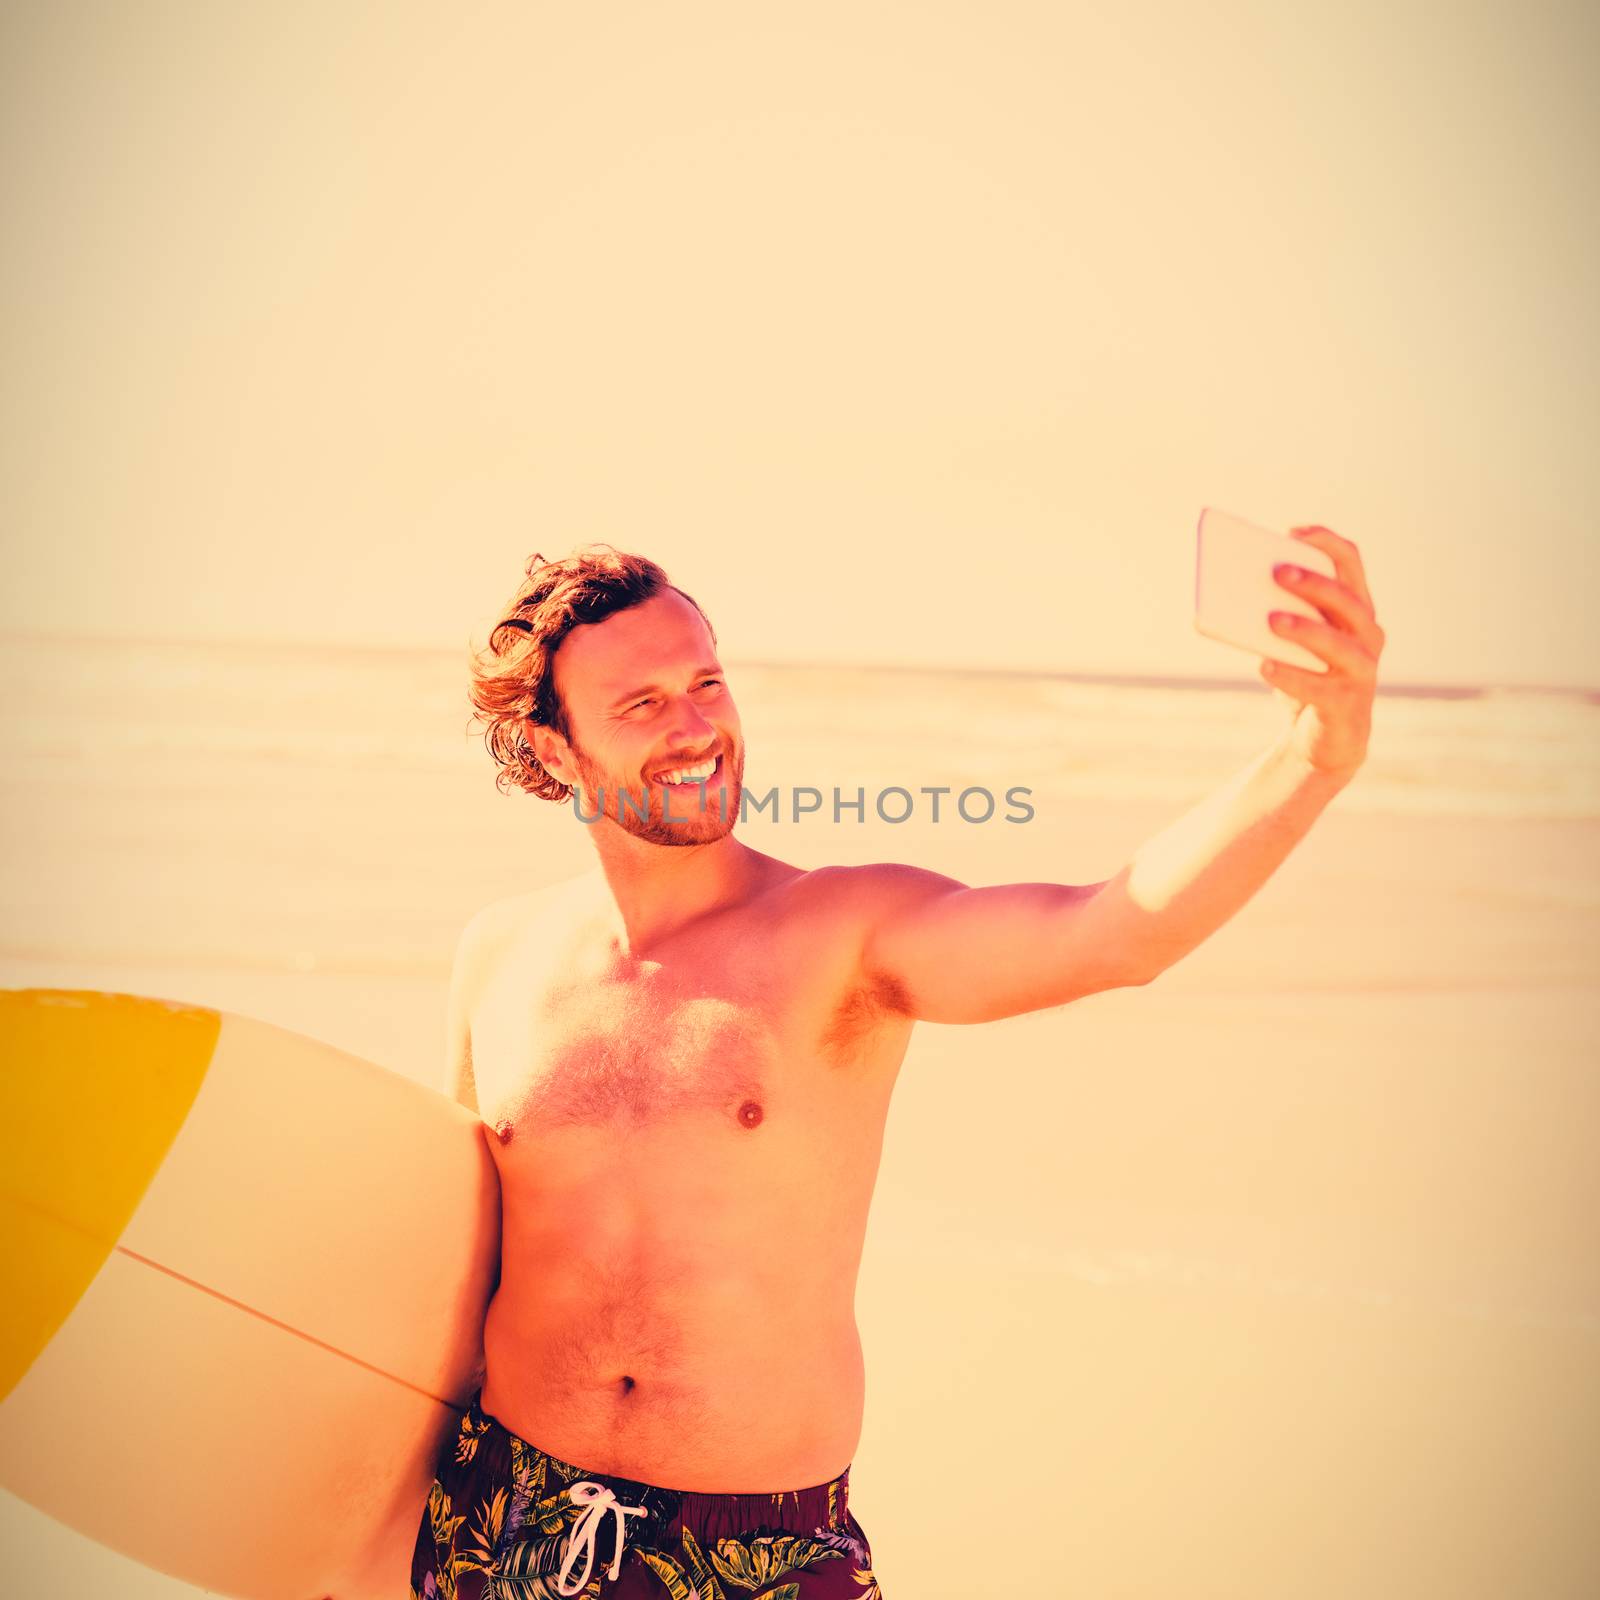 Smiling shirtless man taking selfie with surfboard at beach by Wavebreakmedia